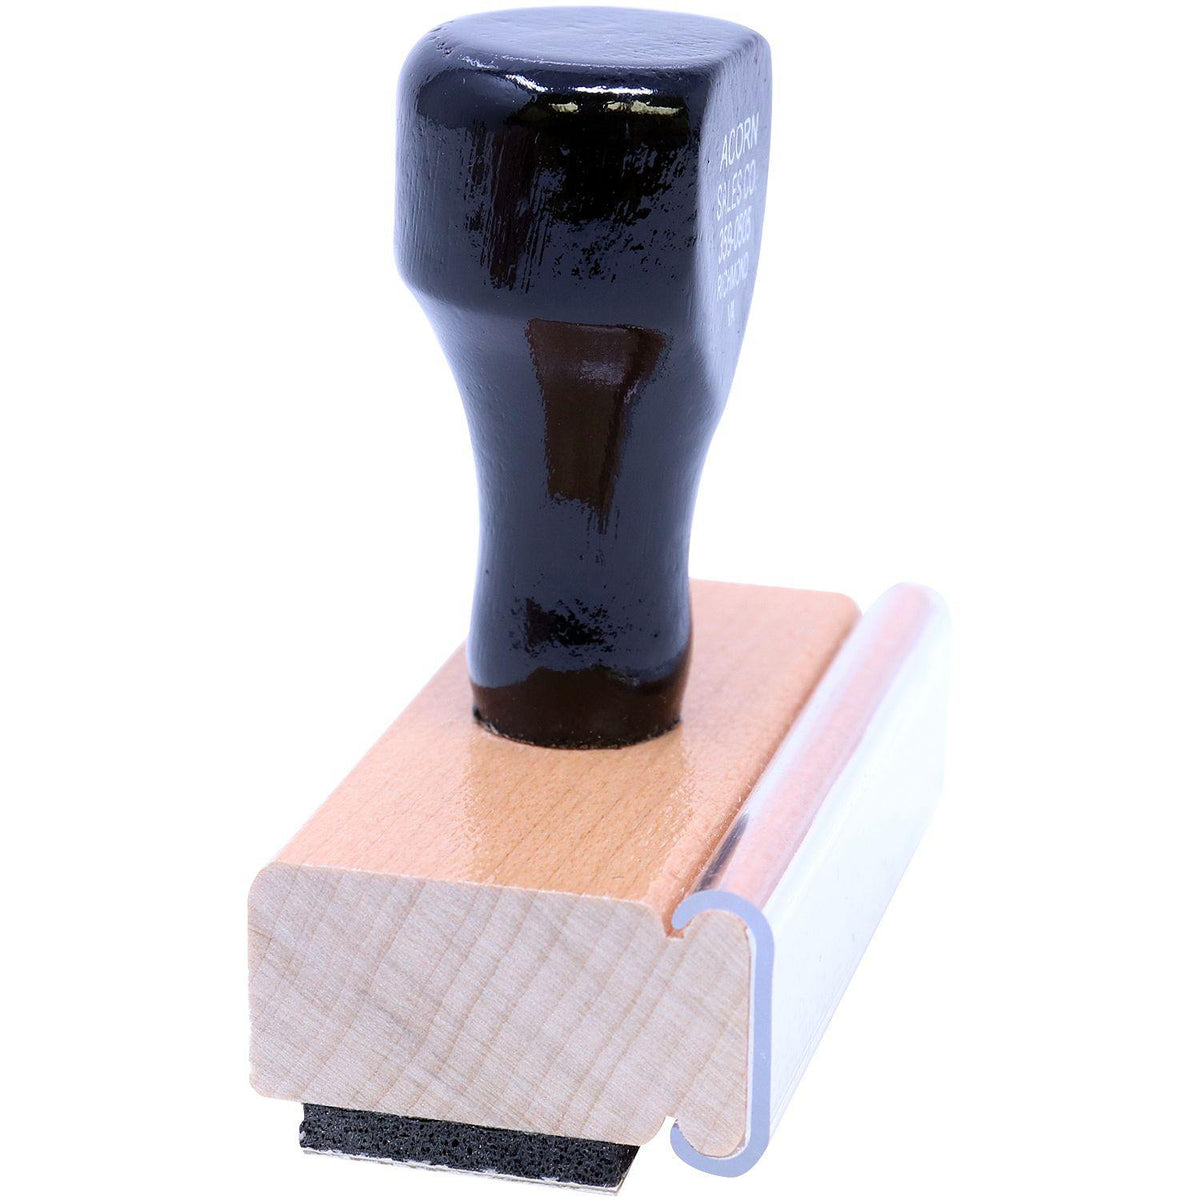 Large Two Thumbs Up Rubber Stamp - Engineer Seal Stamps - Brand_Acorn, Impression Size_Large, Stamp Type_Regular Stamp, Type of Use_Teacher